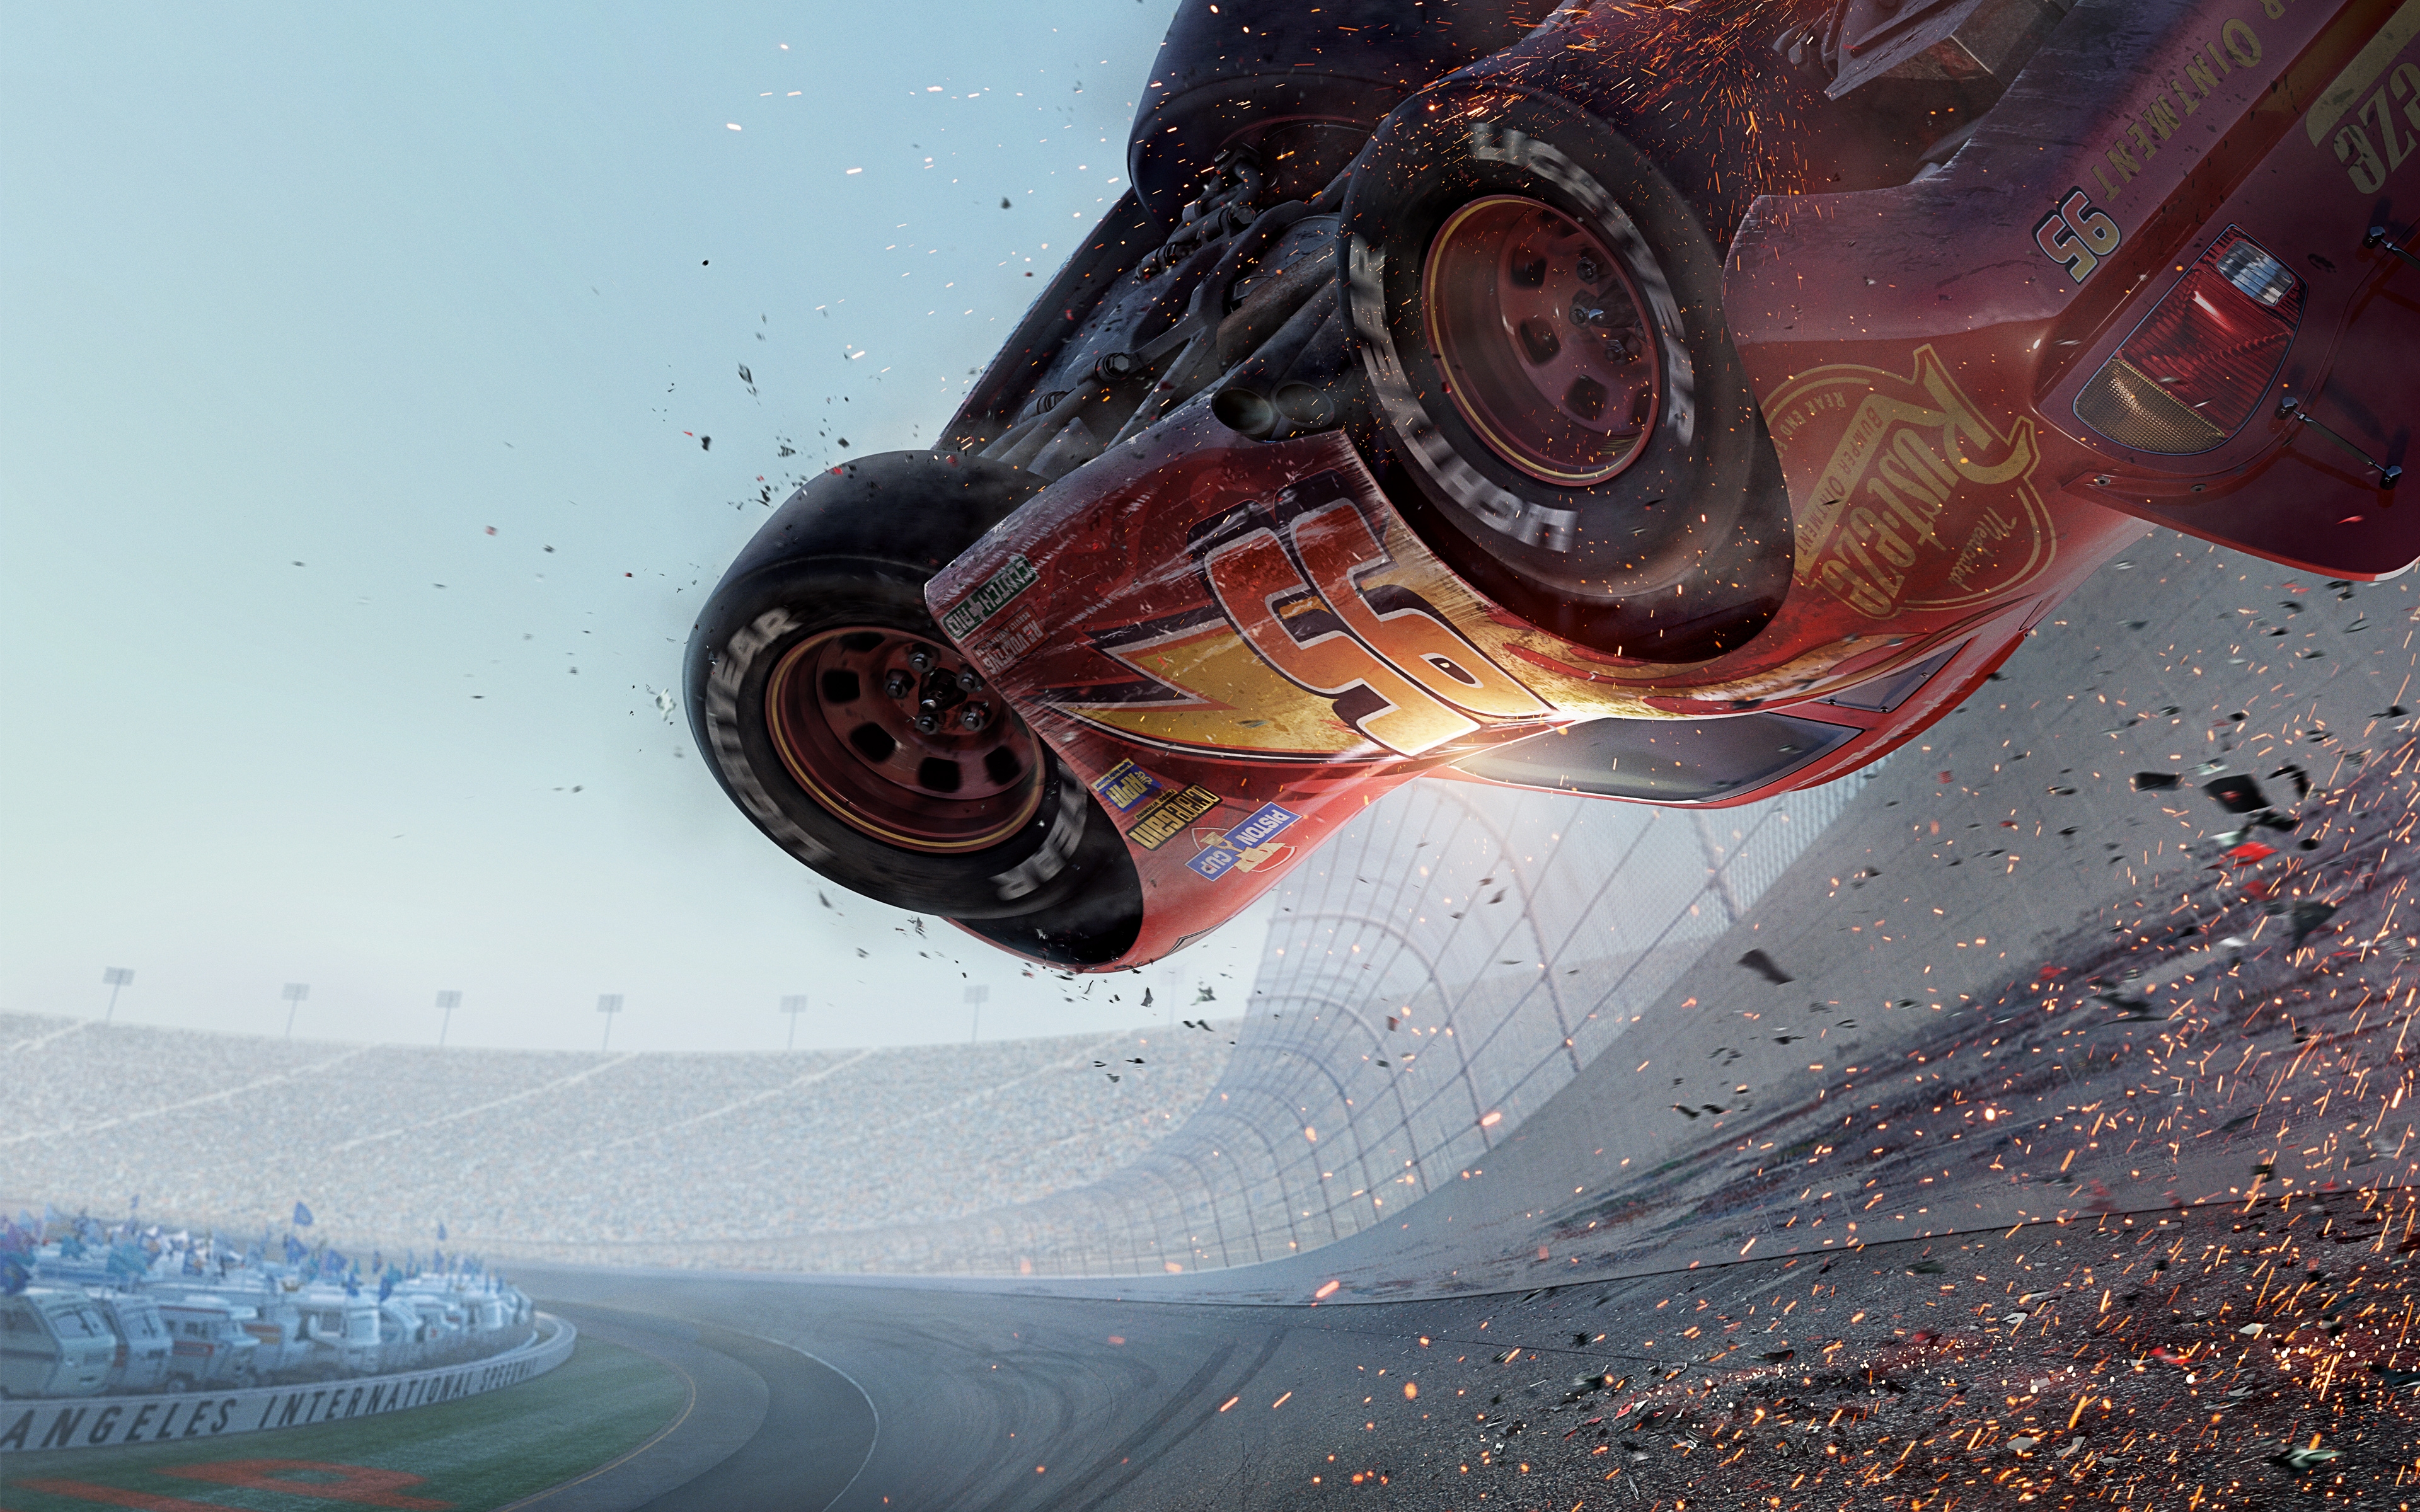 The accident from Cars 3.